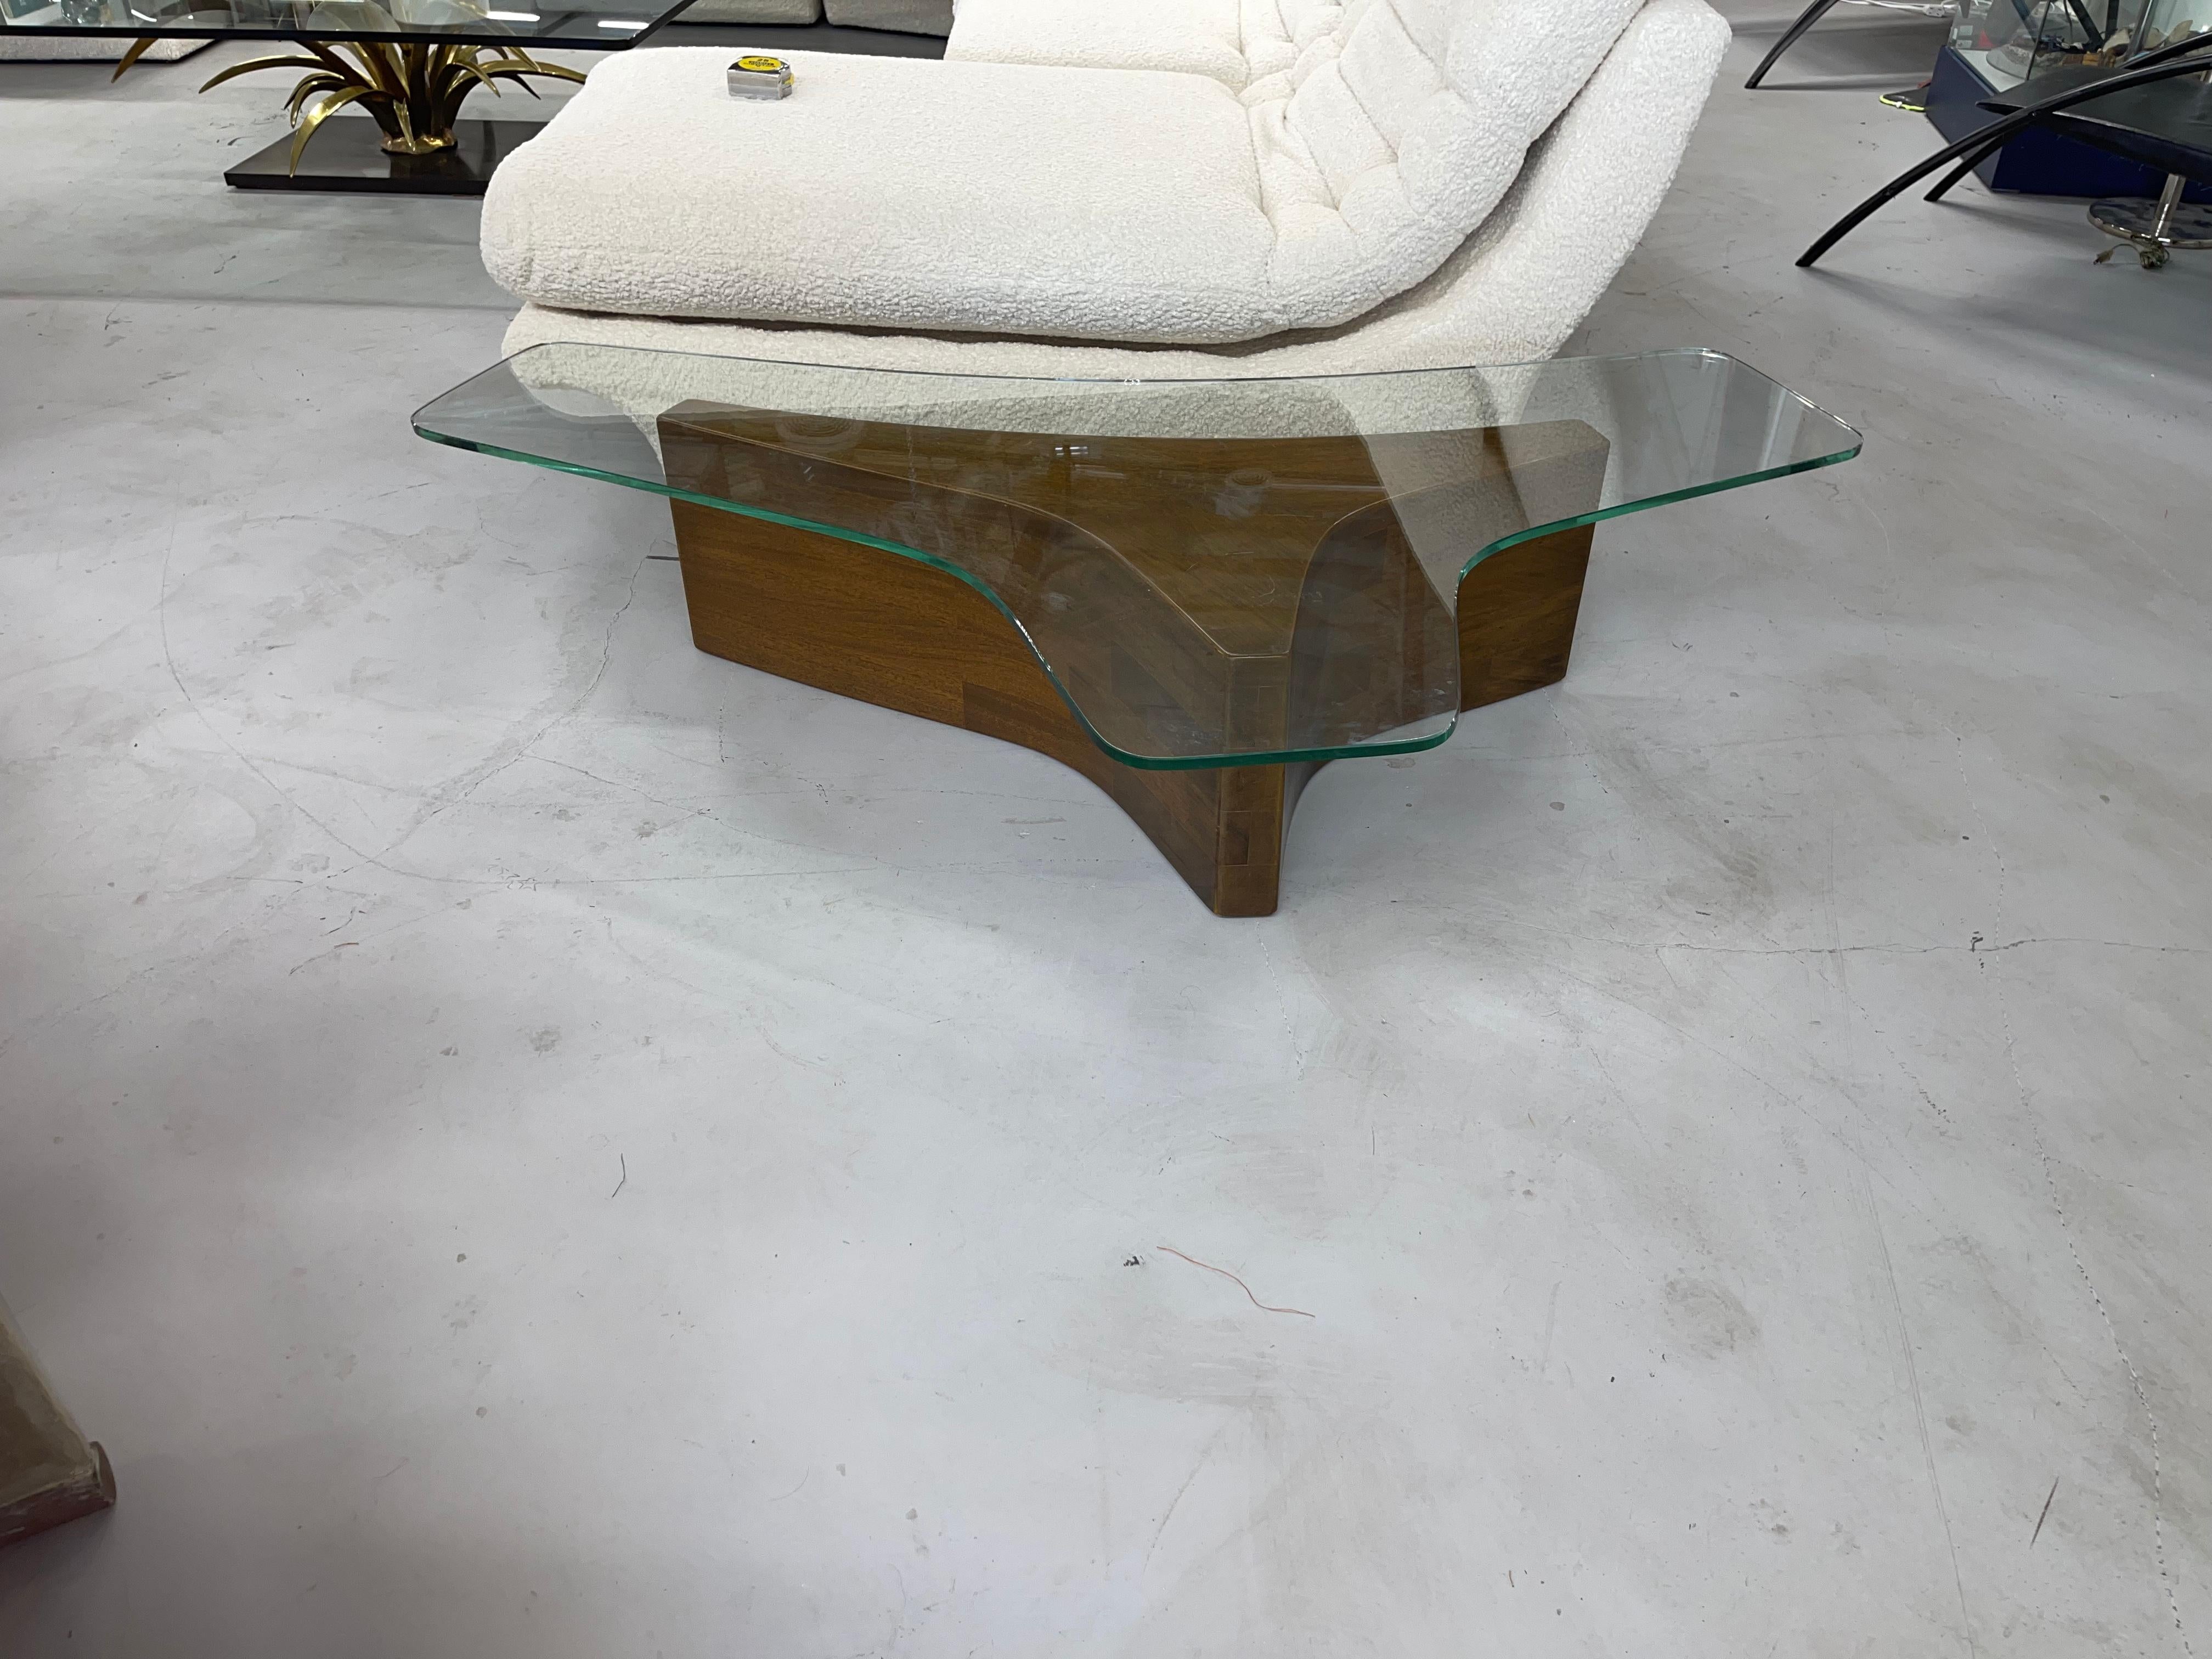 Wonderfully shaped coffee table after a design of Vladimir Kagan. Great period mid century table. Beautifully shaped glass on a sculptural base. Glass has some surface scratches, and the base has a few imperfections.